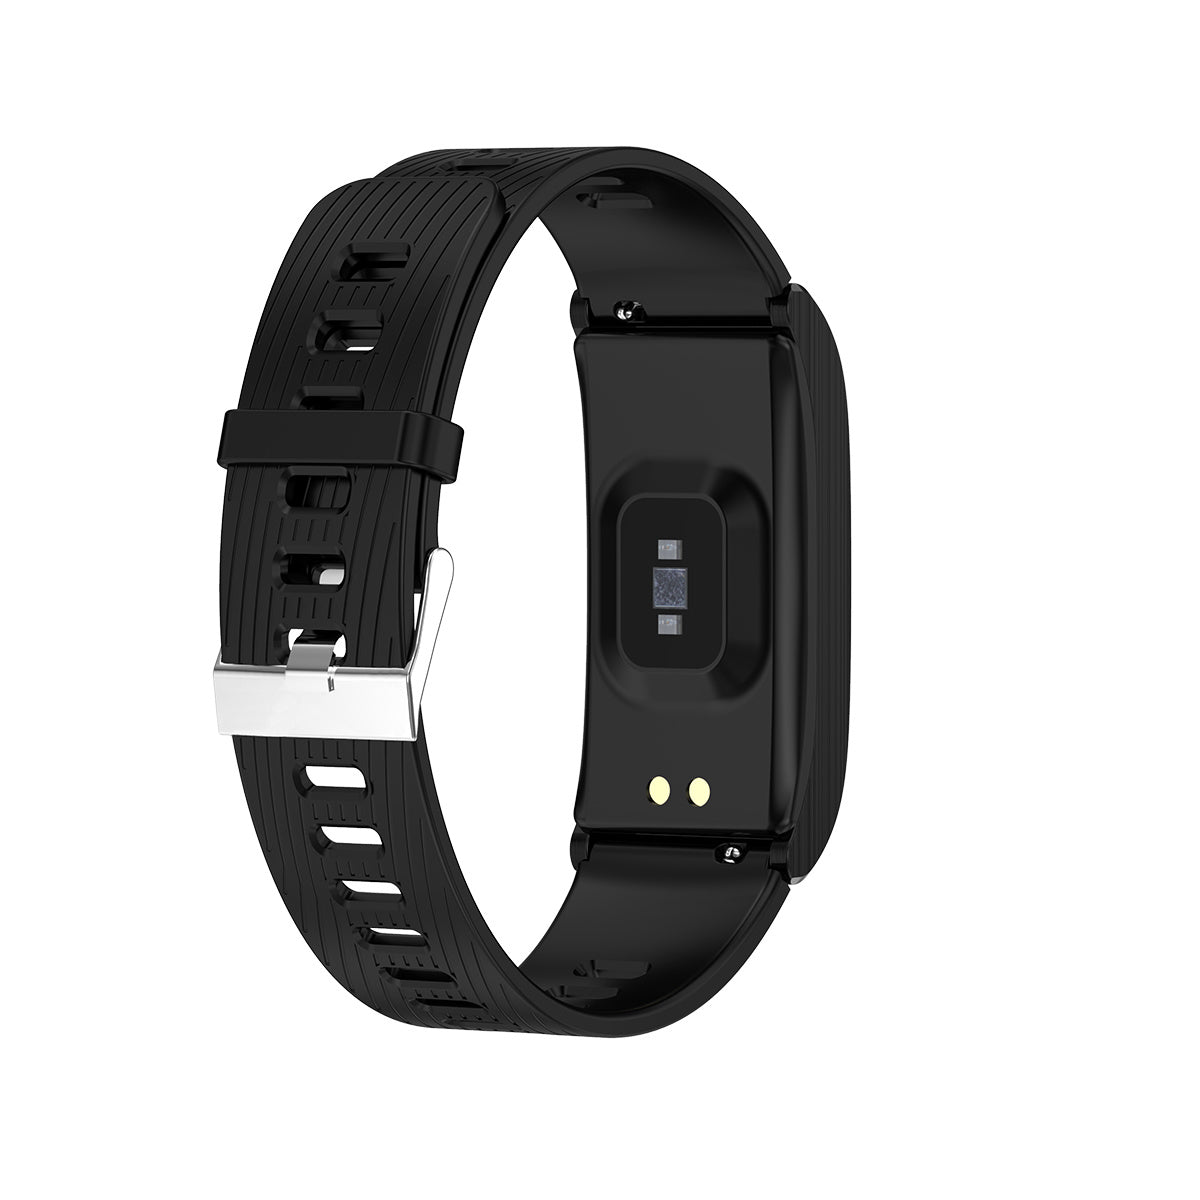 Smart watch pedometer heart rate monitor sleep sedentary reminder sports 0.96 inch color screen fashion bracelet